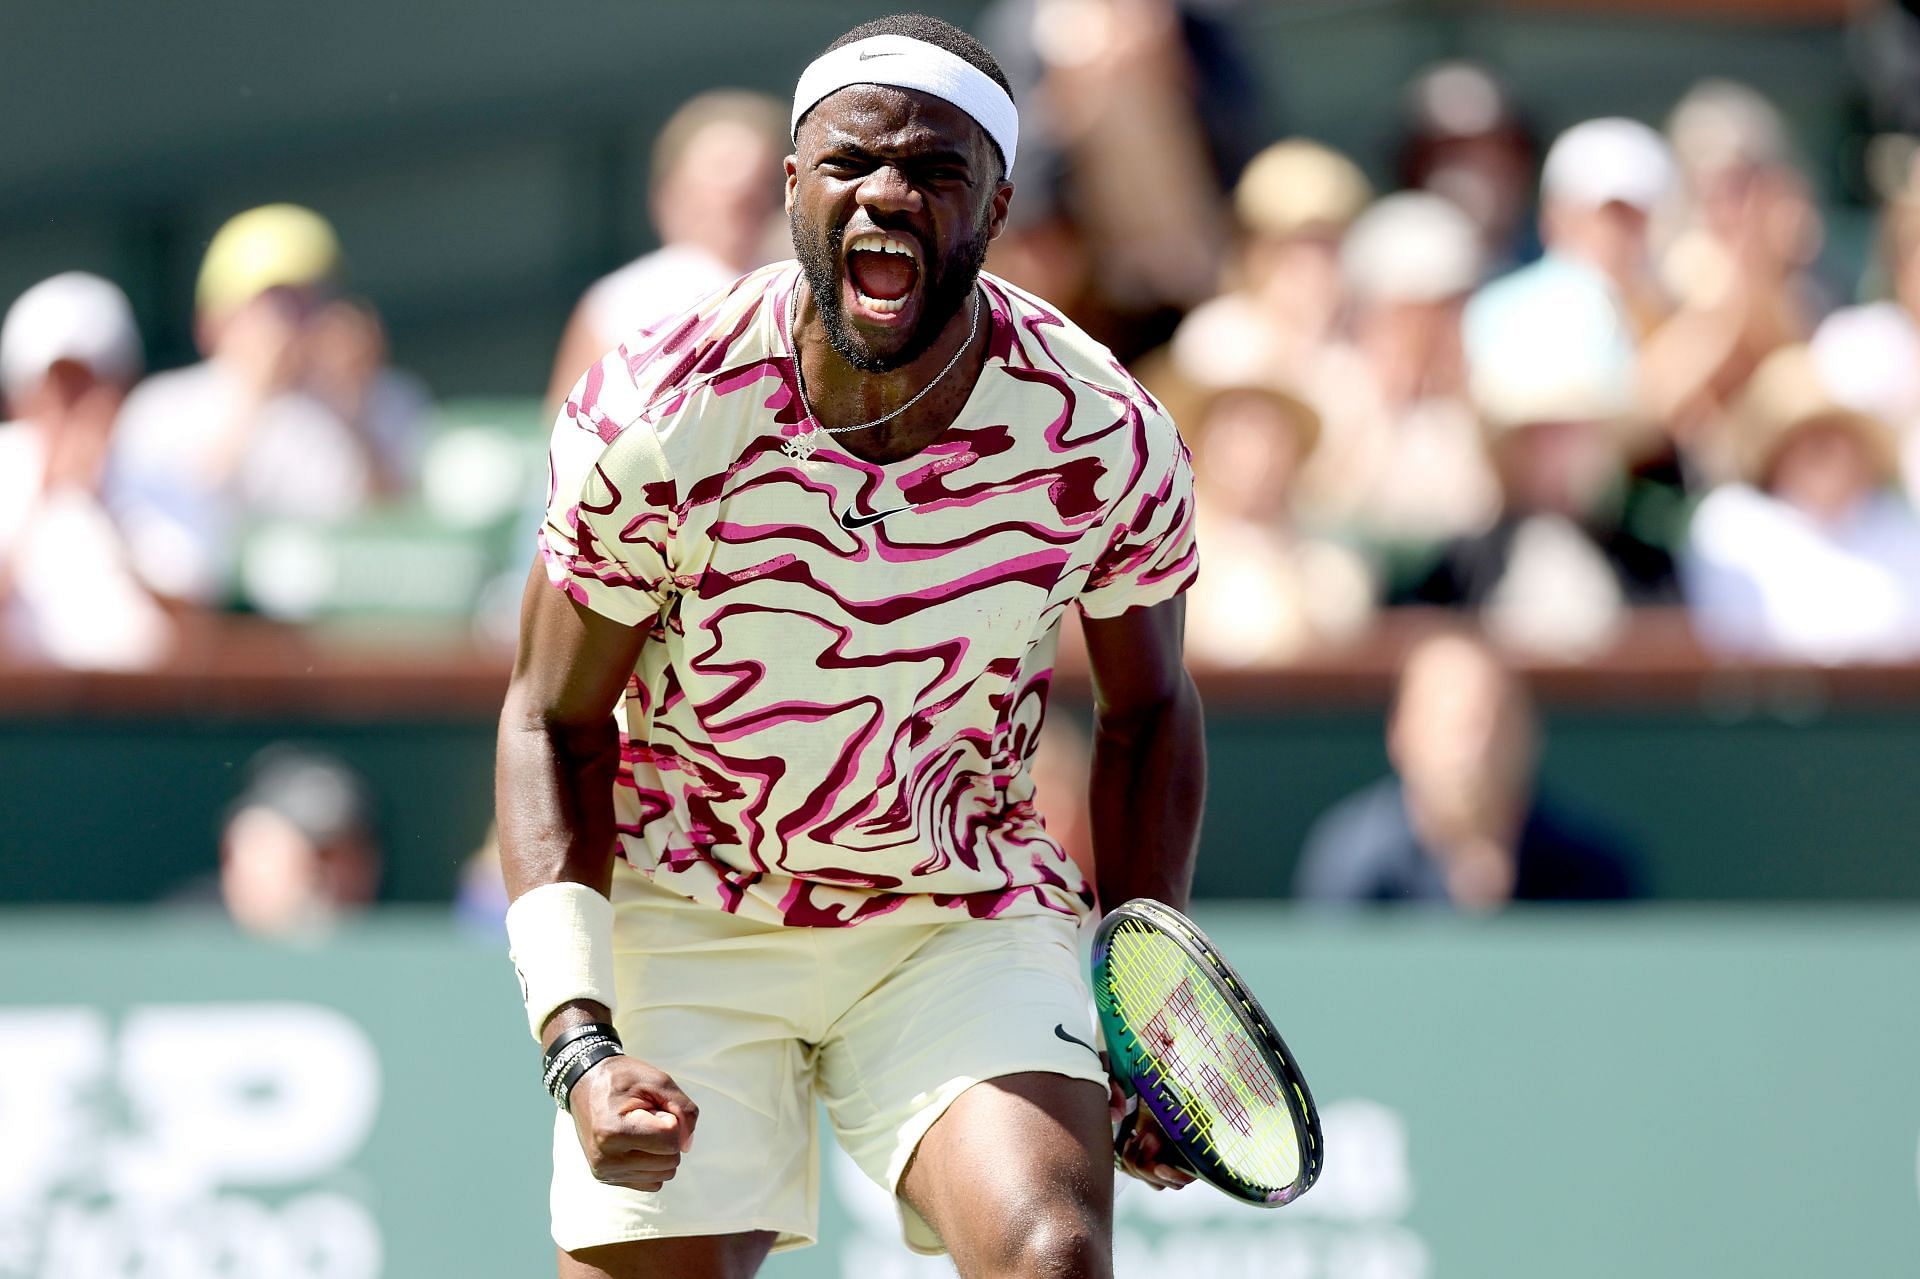 Frances Tiafoe celebrates his win over Cameron Norrie in Indian Wells